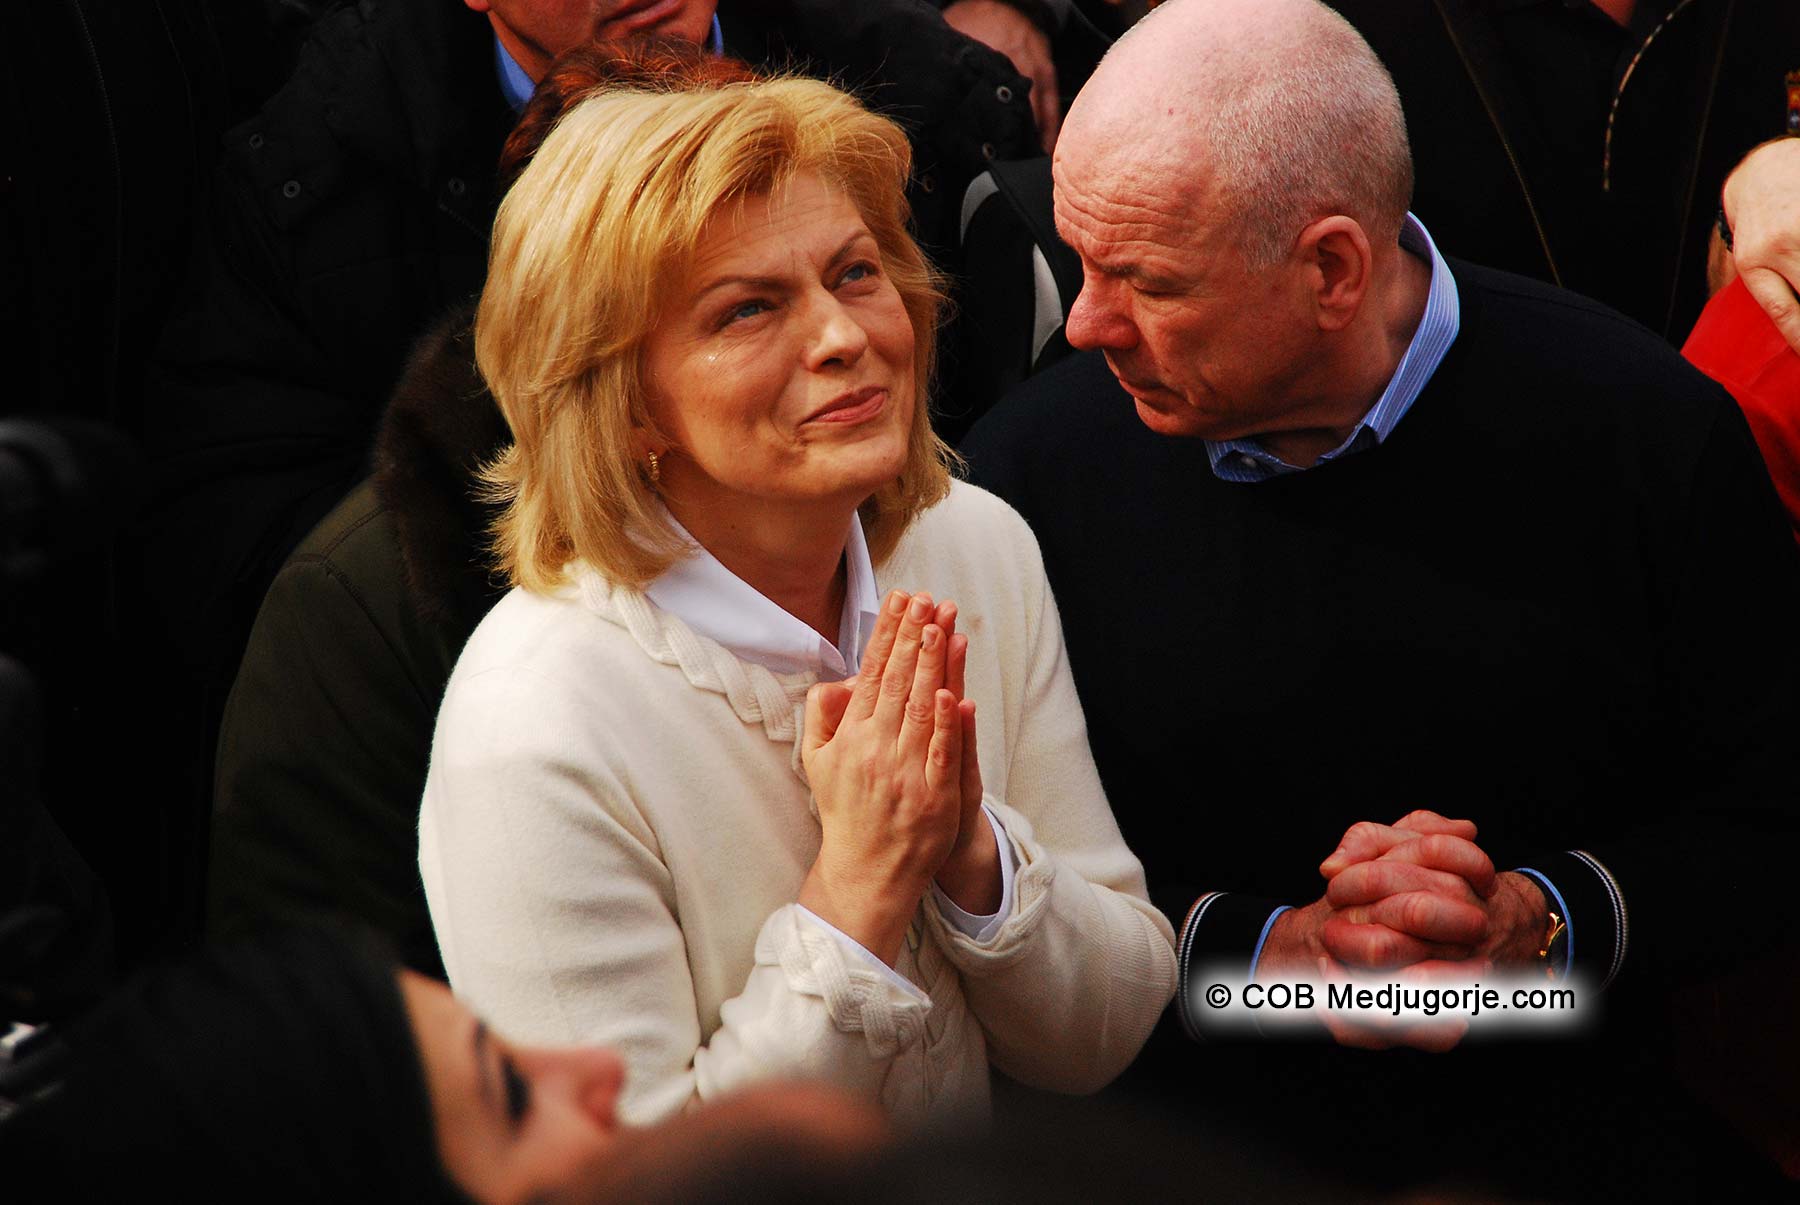 Mirjana during her annual apparition, March 18, 2010